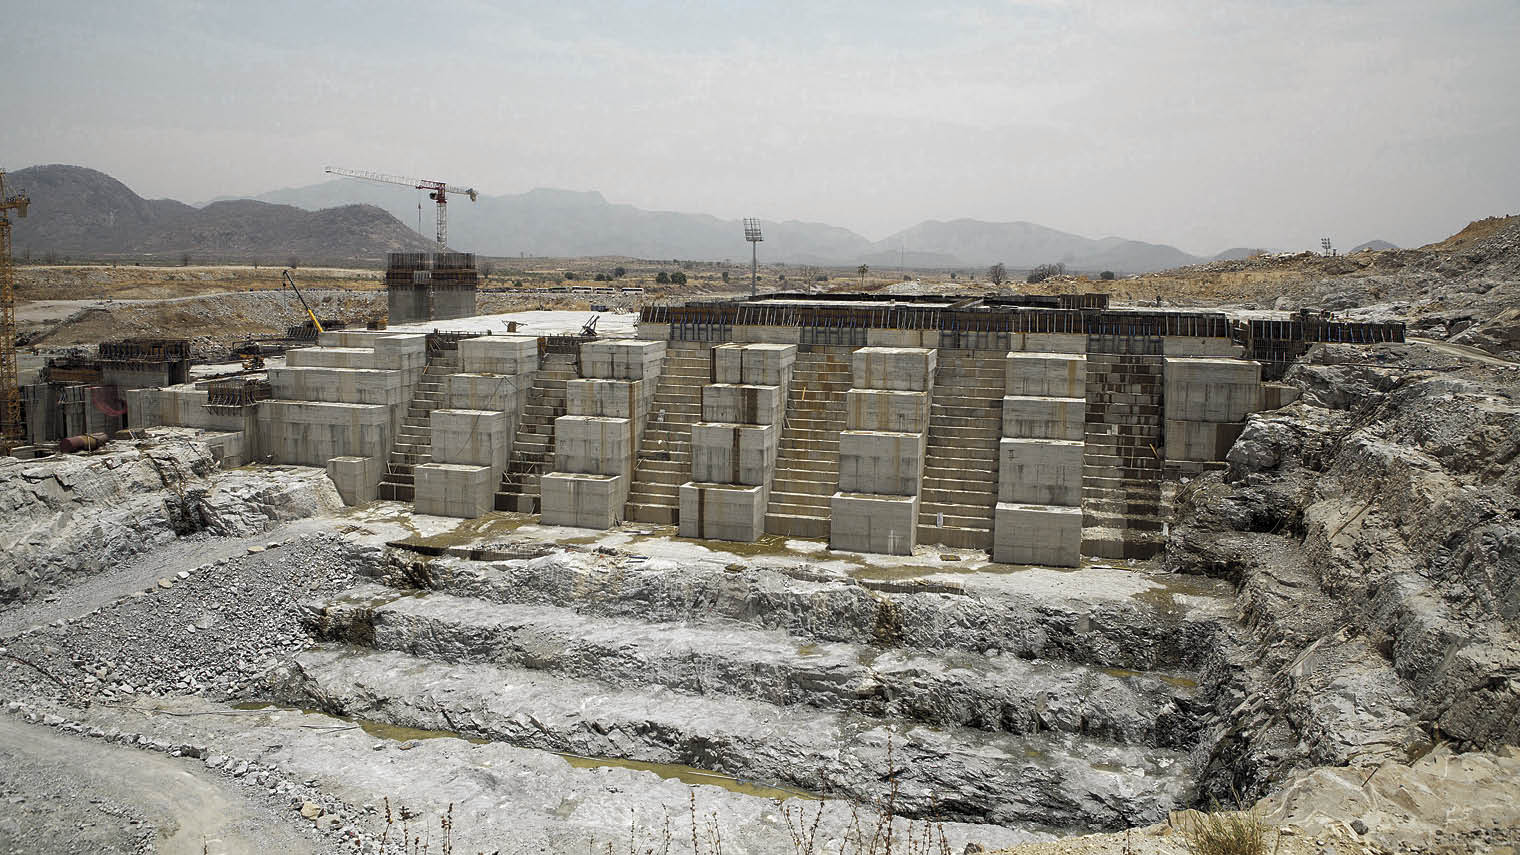 Ethiopia is self-funding the new 6,000MW Grand Ethiopian Renaissance Dam, which will be Africa’s largest when completed